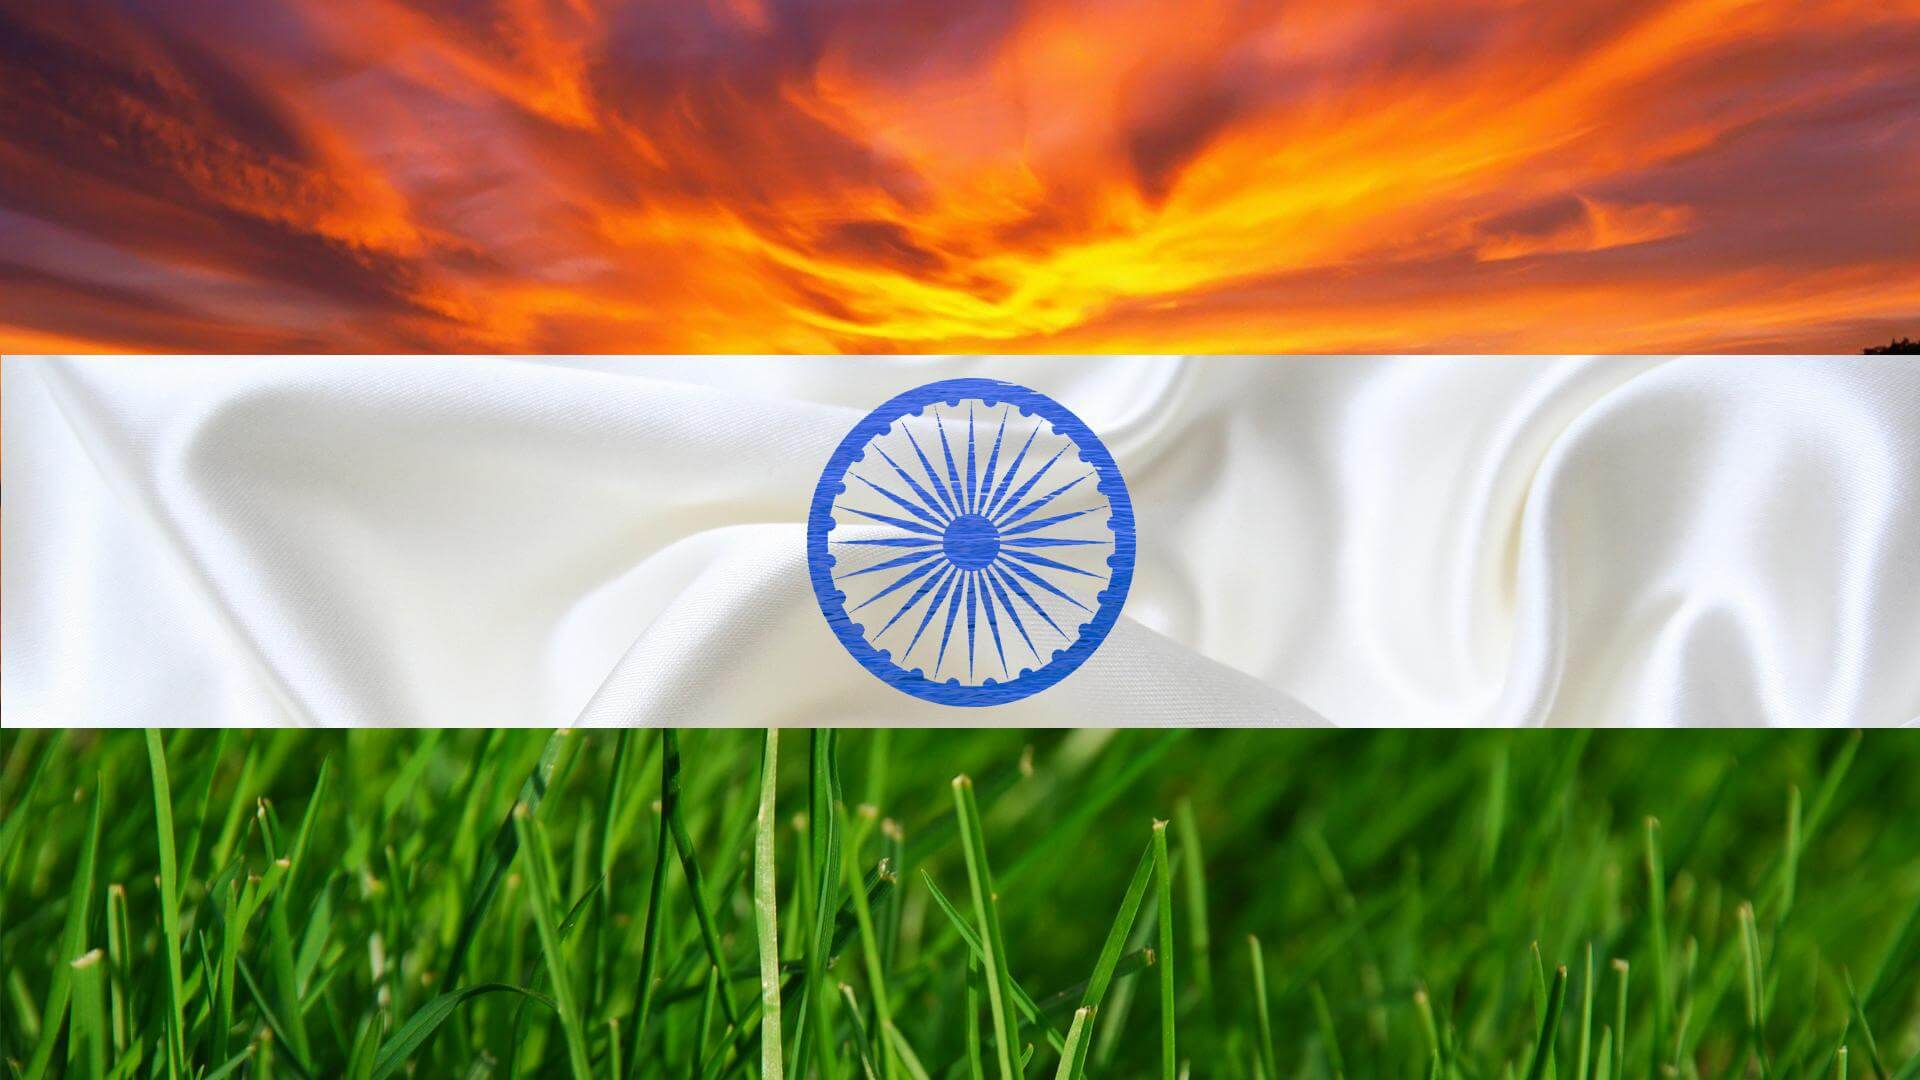 National Flag Of India Wallpapers HD - Wallpaper Cave